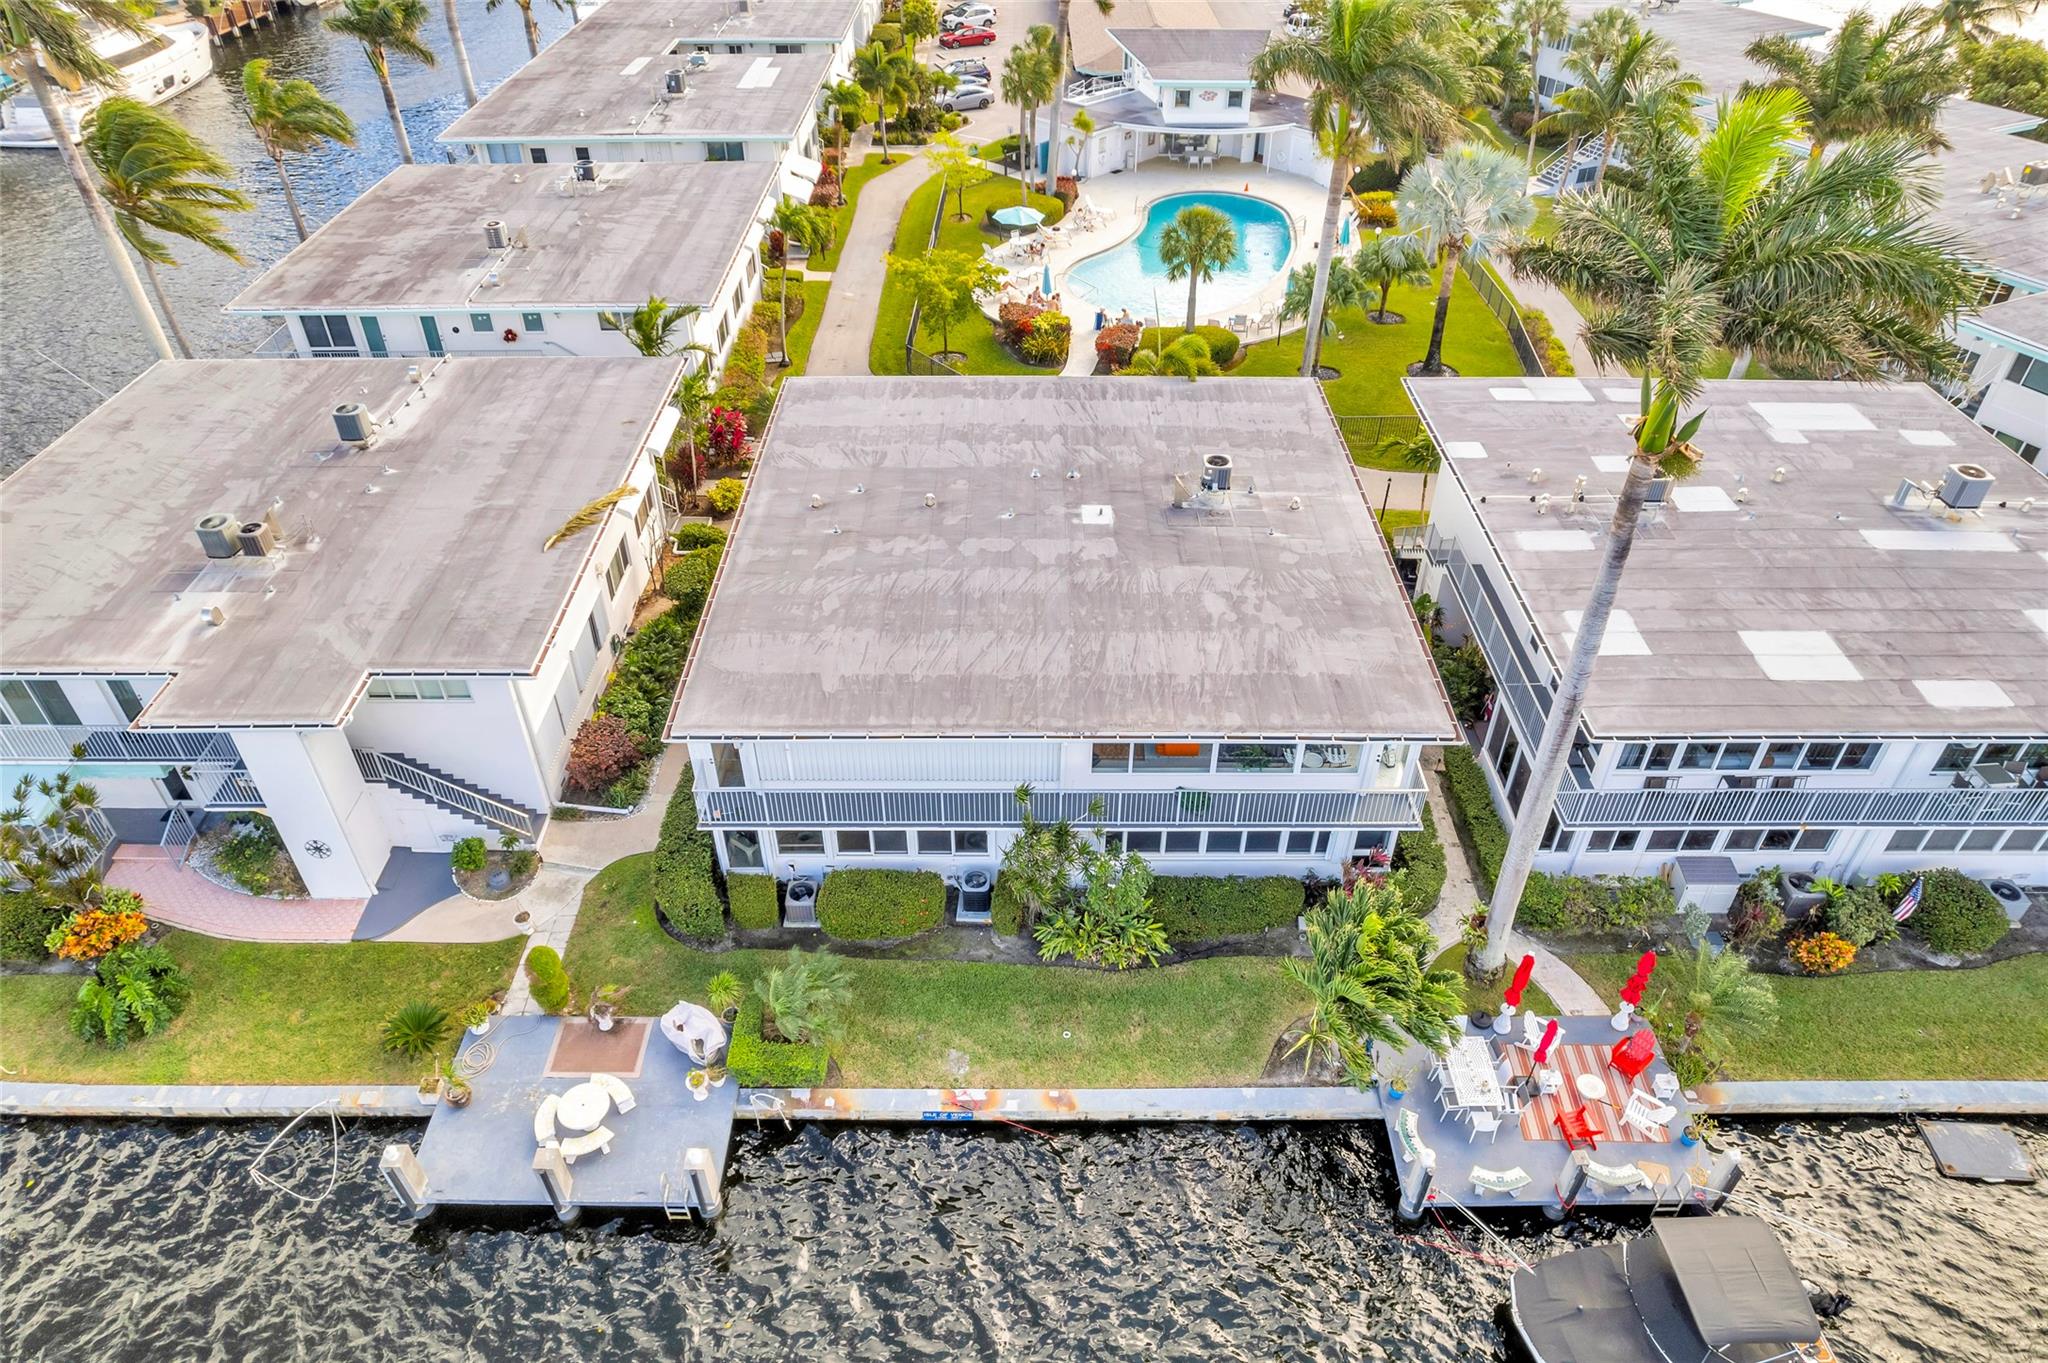 Finally! The Oasis complete package you've been waiting for! WATERFRONT resort living with amazing water views from almost every window (2)Prime setting overlooking the wide Rio Barcelona Canal yet walkable to Las Olas and the beach!  (3) Hotly appreciating Isle of Venice Dr. with designated "land share" interest and prime covered parking INCLUDED in price (4) TWO spacious master suites (5) updated kitchen/ bath and tiled throughout, central A/c & heat; (washer/dryer in unit) 6) Patio/ BOAT DOCK with ocean access (7) Outdoor grill. Owners can rent out after one year.  On site management ideal for luxury living with spacious landscaping surrounding large heated swimming pool on the tip of the Isle of Venice peninsula just off fabulous Las Olas Boulevard with abundant stores/restaurants.